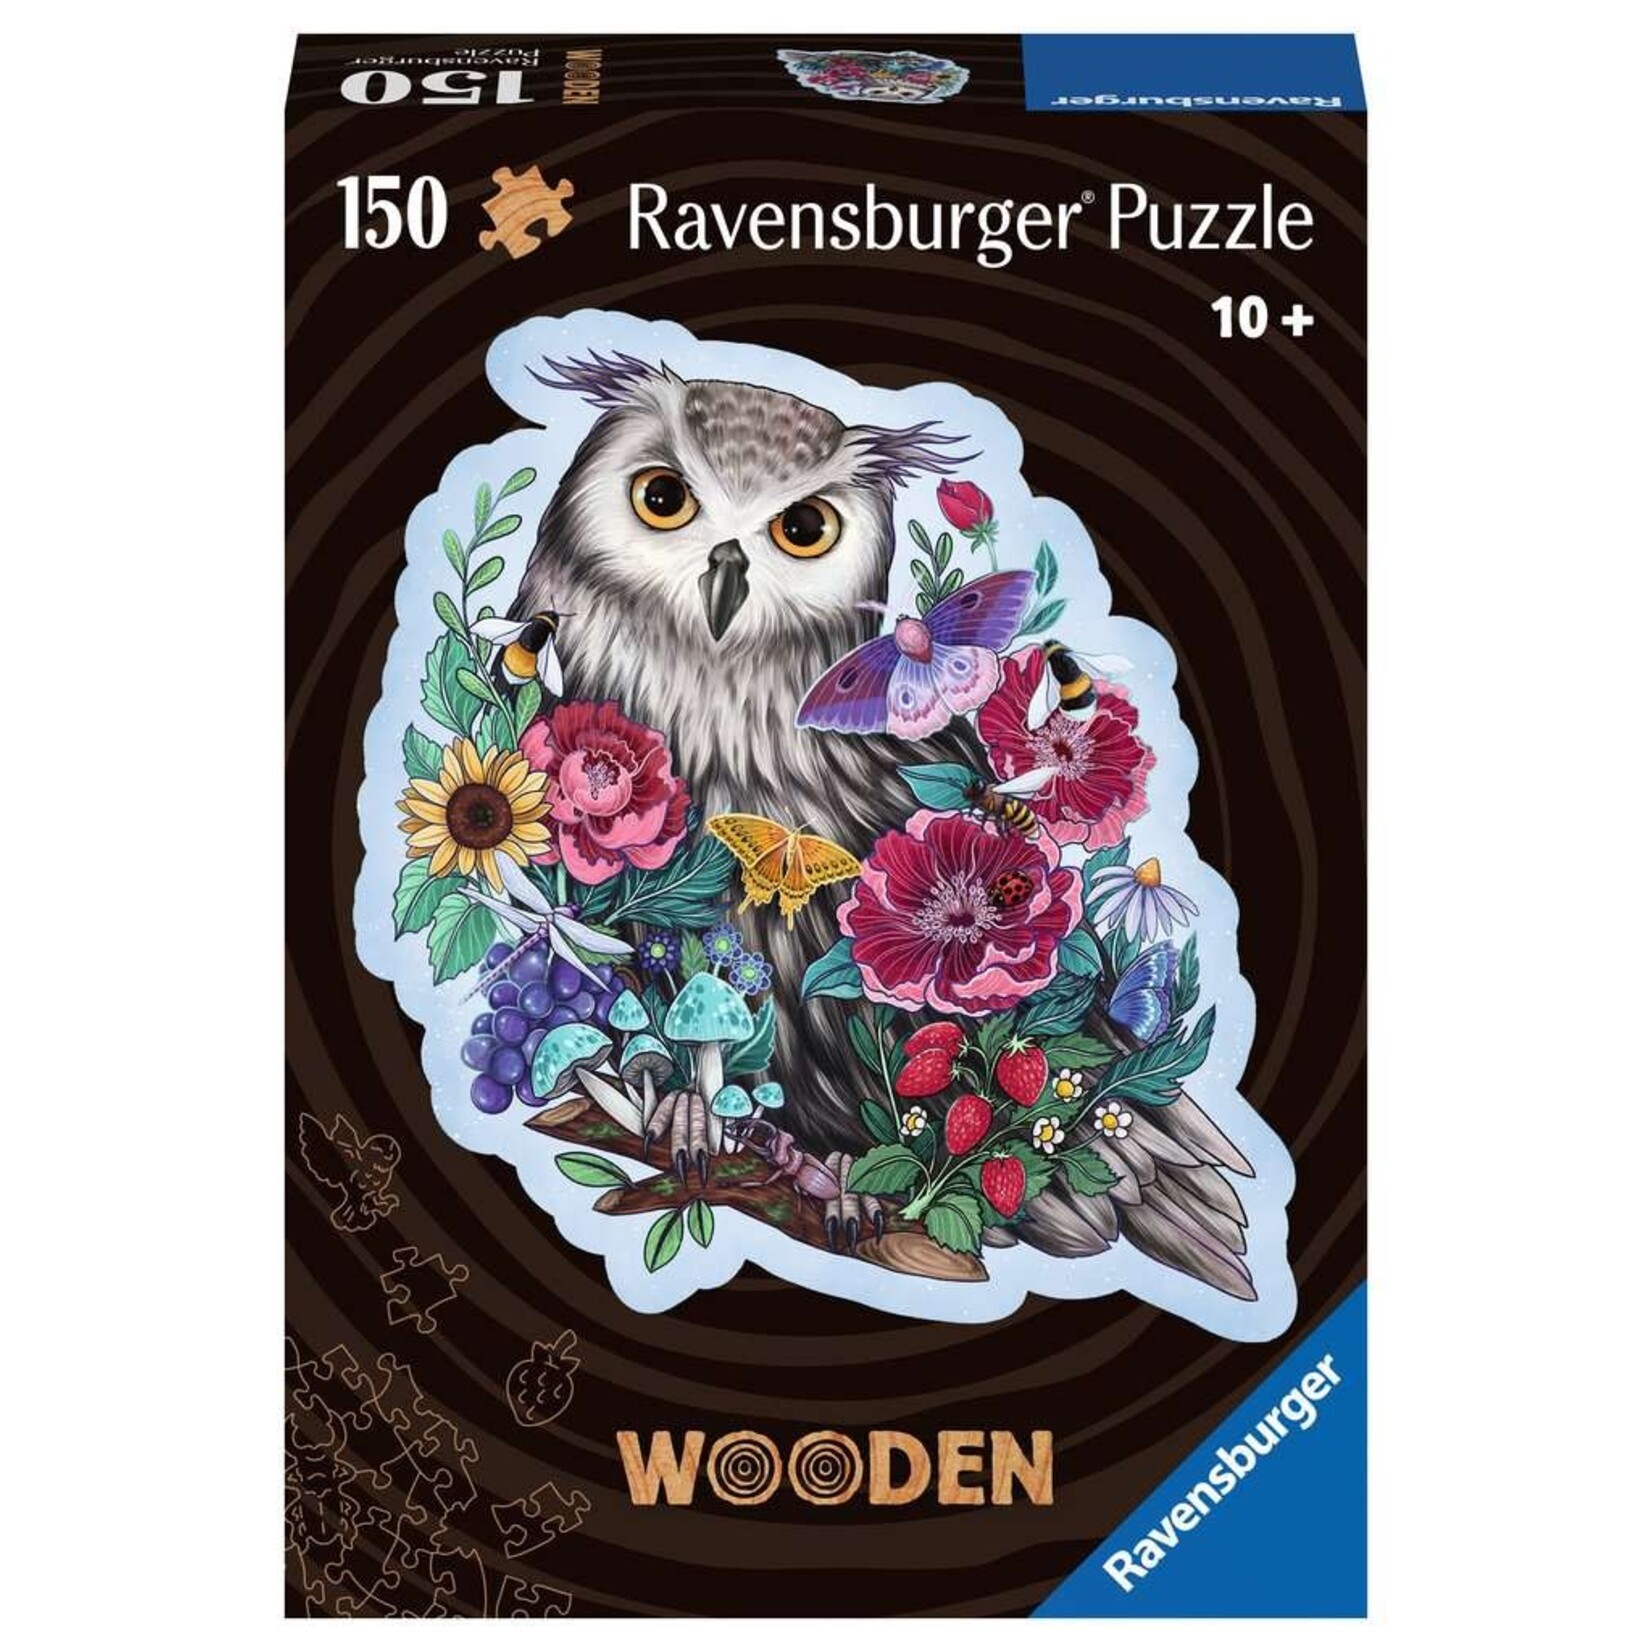 WOOD: Mysterious Owl 150 Piece Wooden Shape Puzzle